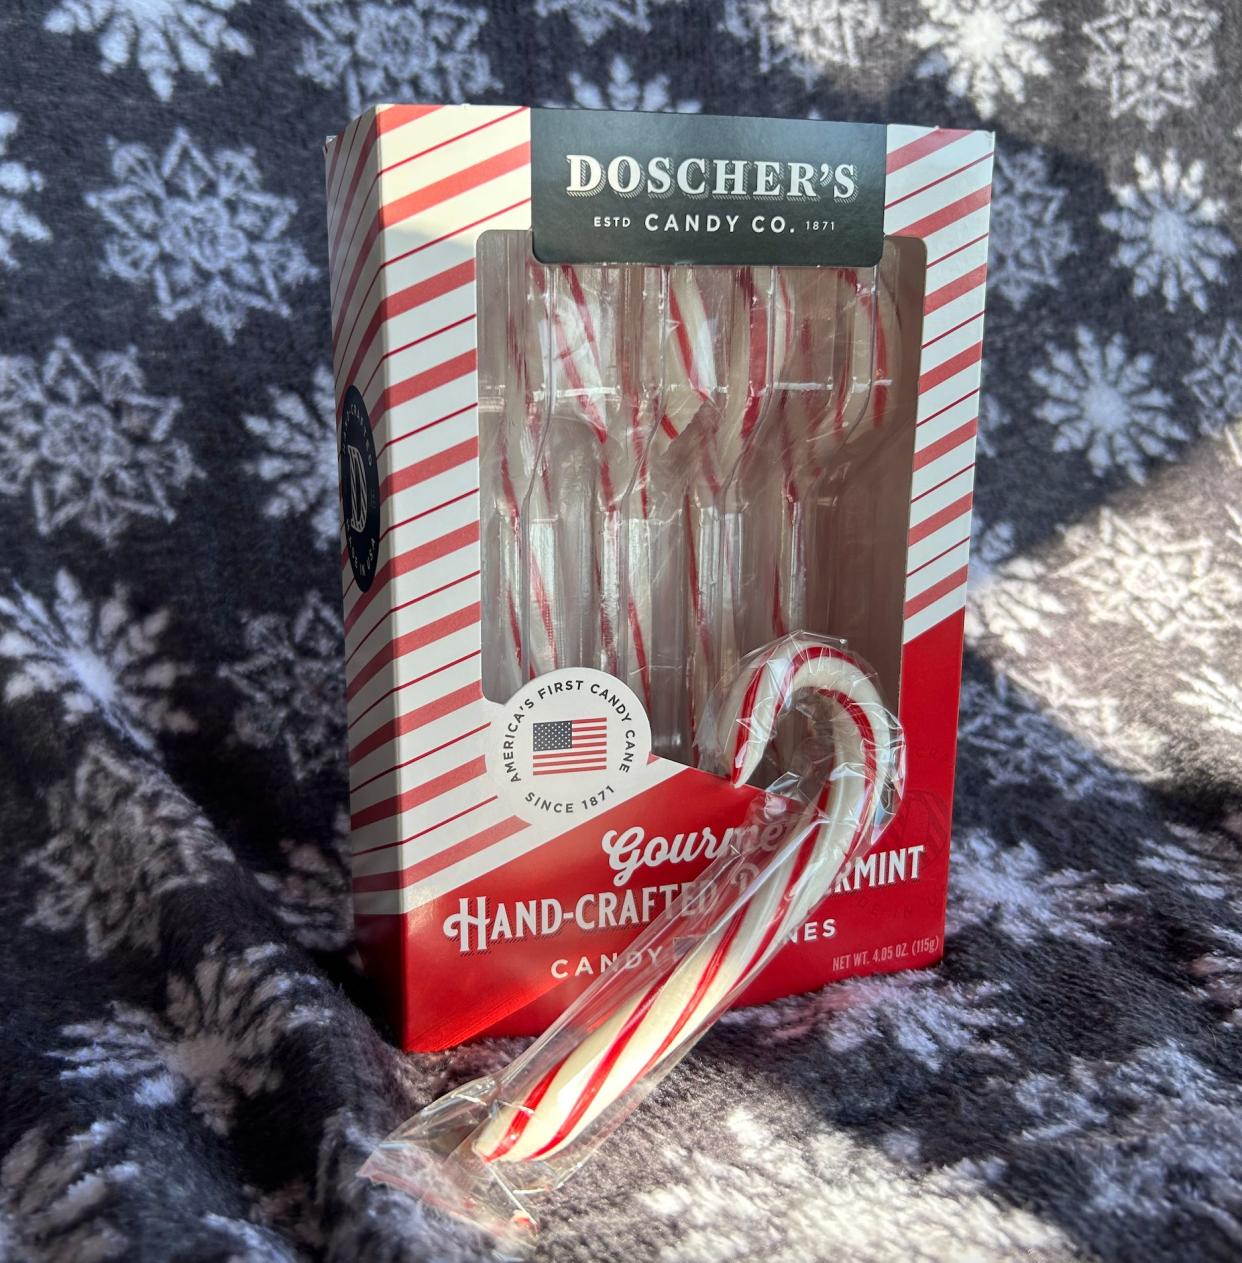 The handmade candy canes from Doscher’s Candy Co. are a traditional Christmas treat in Cincinnati.